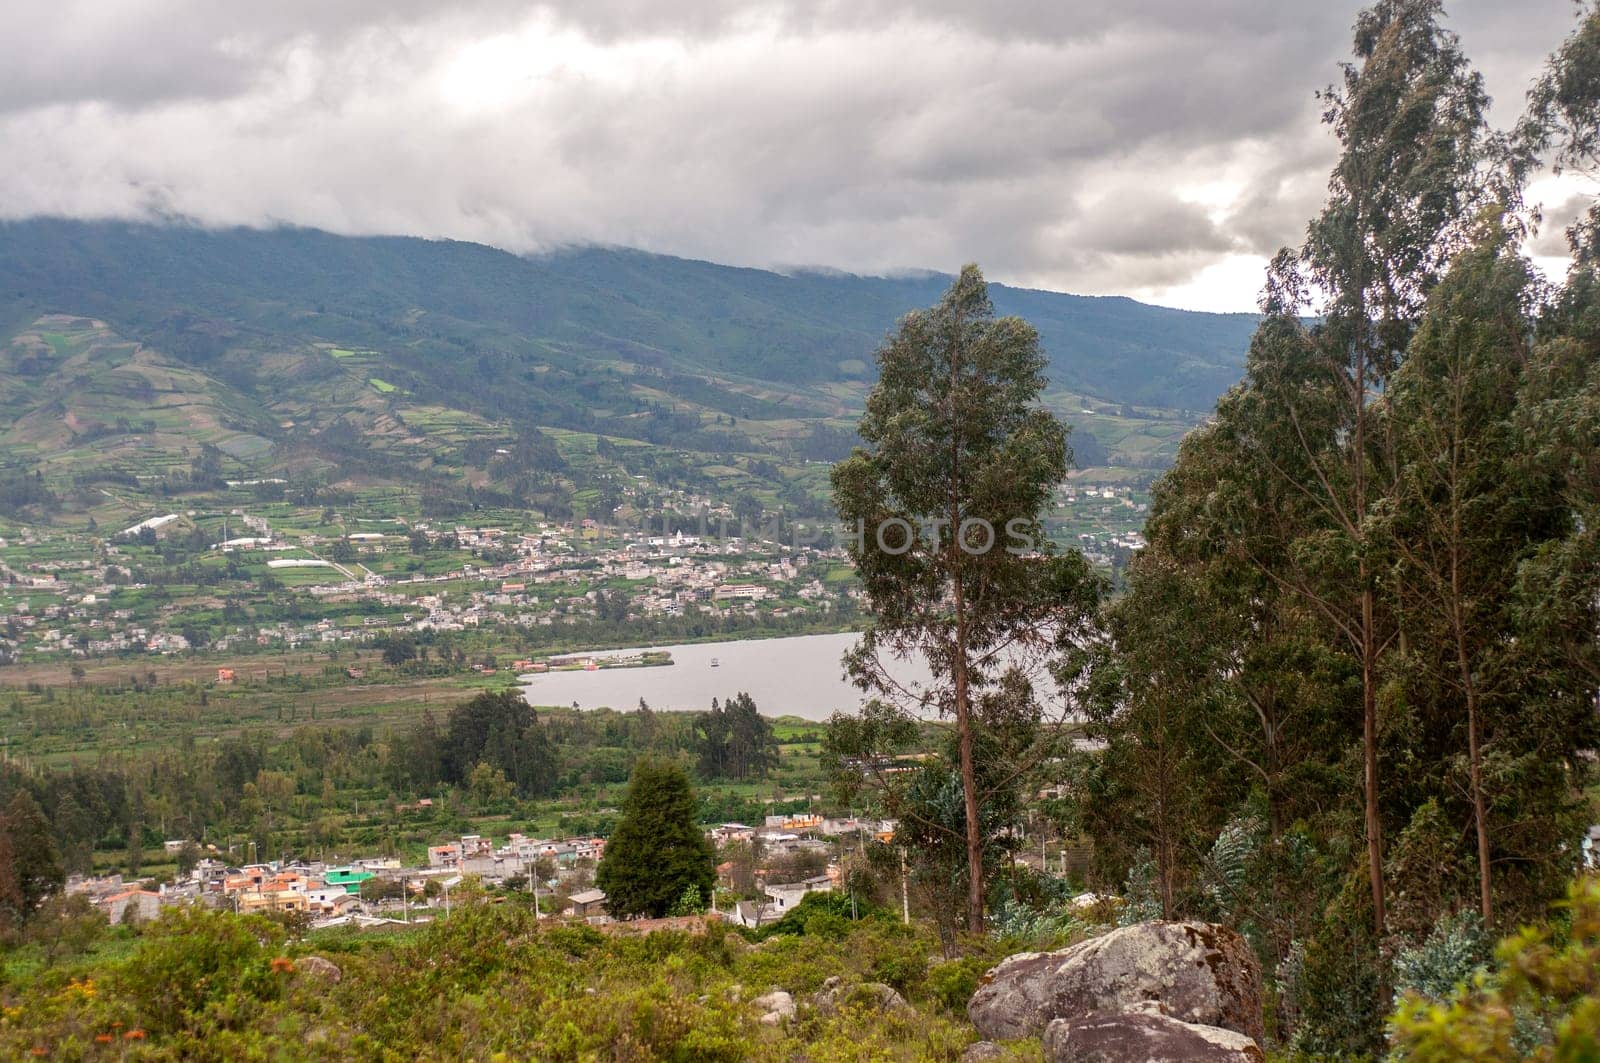 Aerial View of a Town and Lake in Ecuador From a Hill by Raulmartin